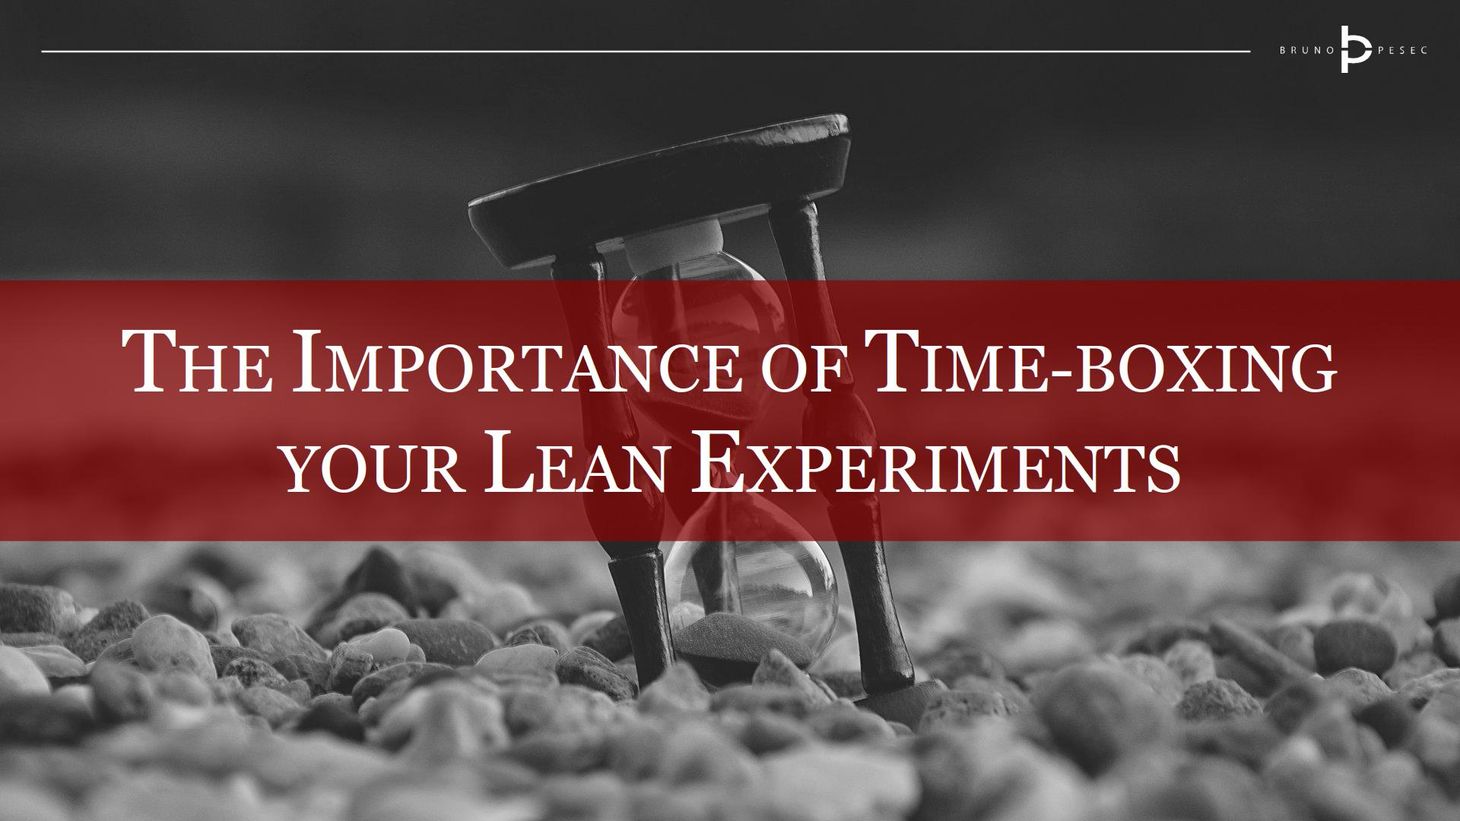 The importance of time-boxing your lean experiments